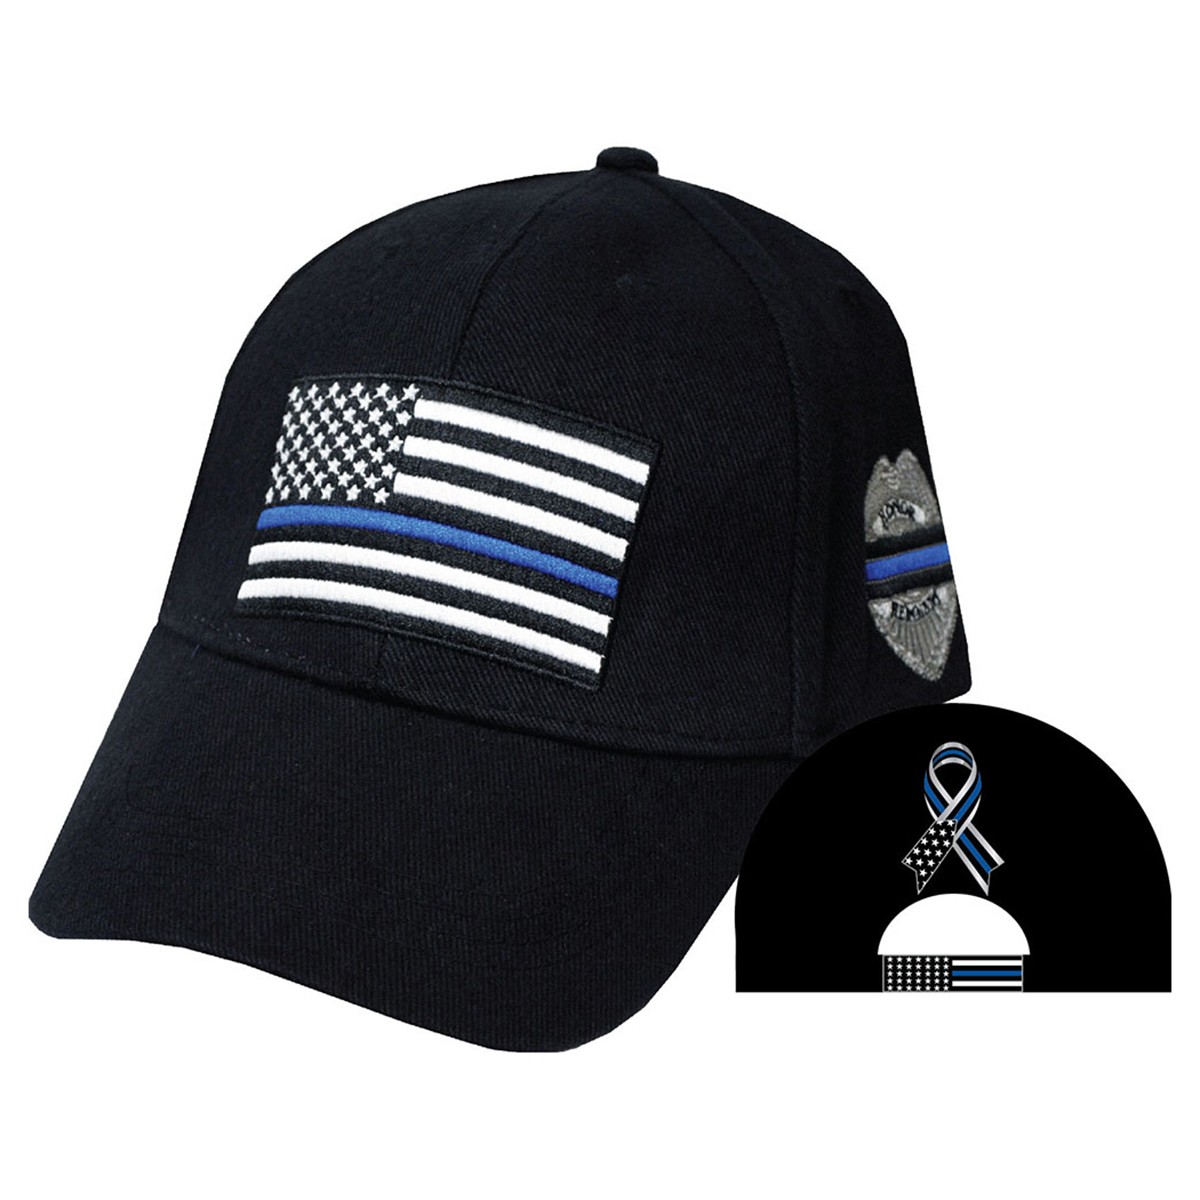 Ee Cap-Police Thin Blue Line